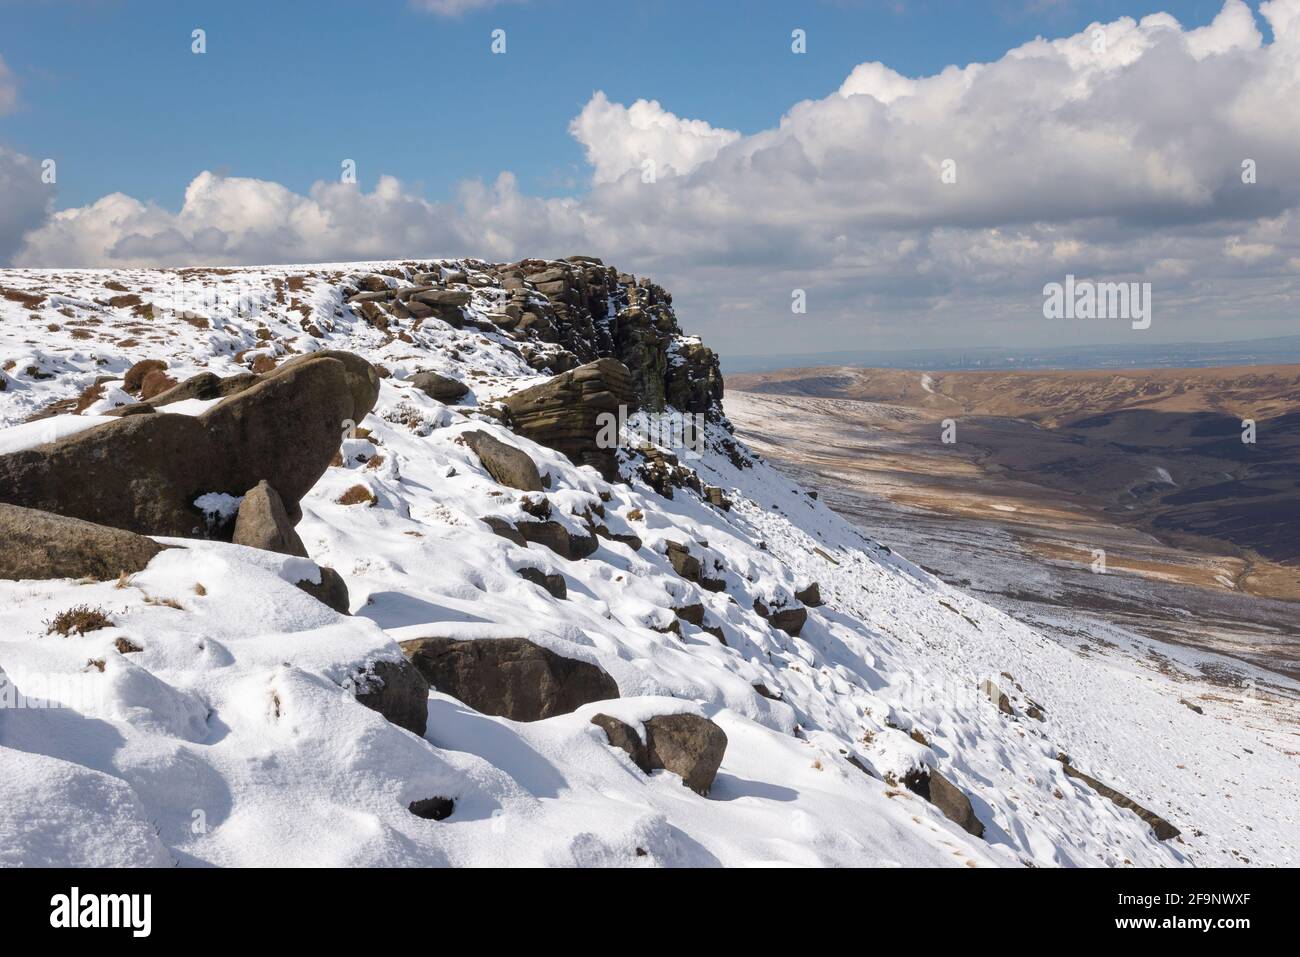 Spectacular view from the northern edge of Kinder Scout, Peak District with Manchester in the far distance. Remnants of late snow on the edge. Stock Photo